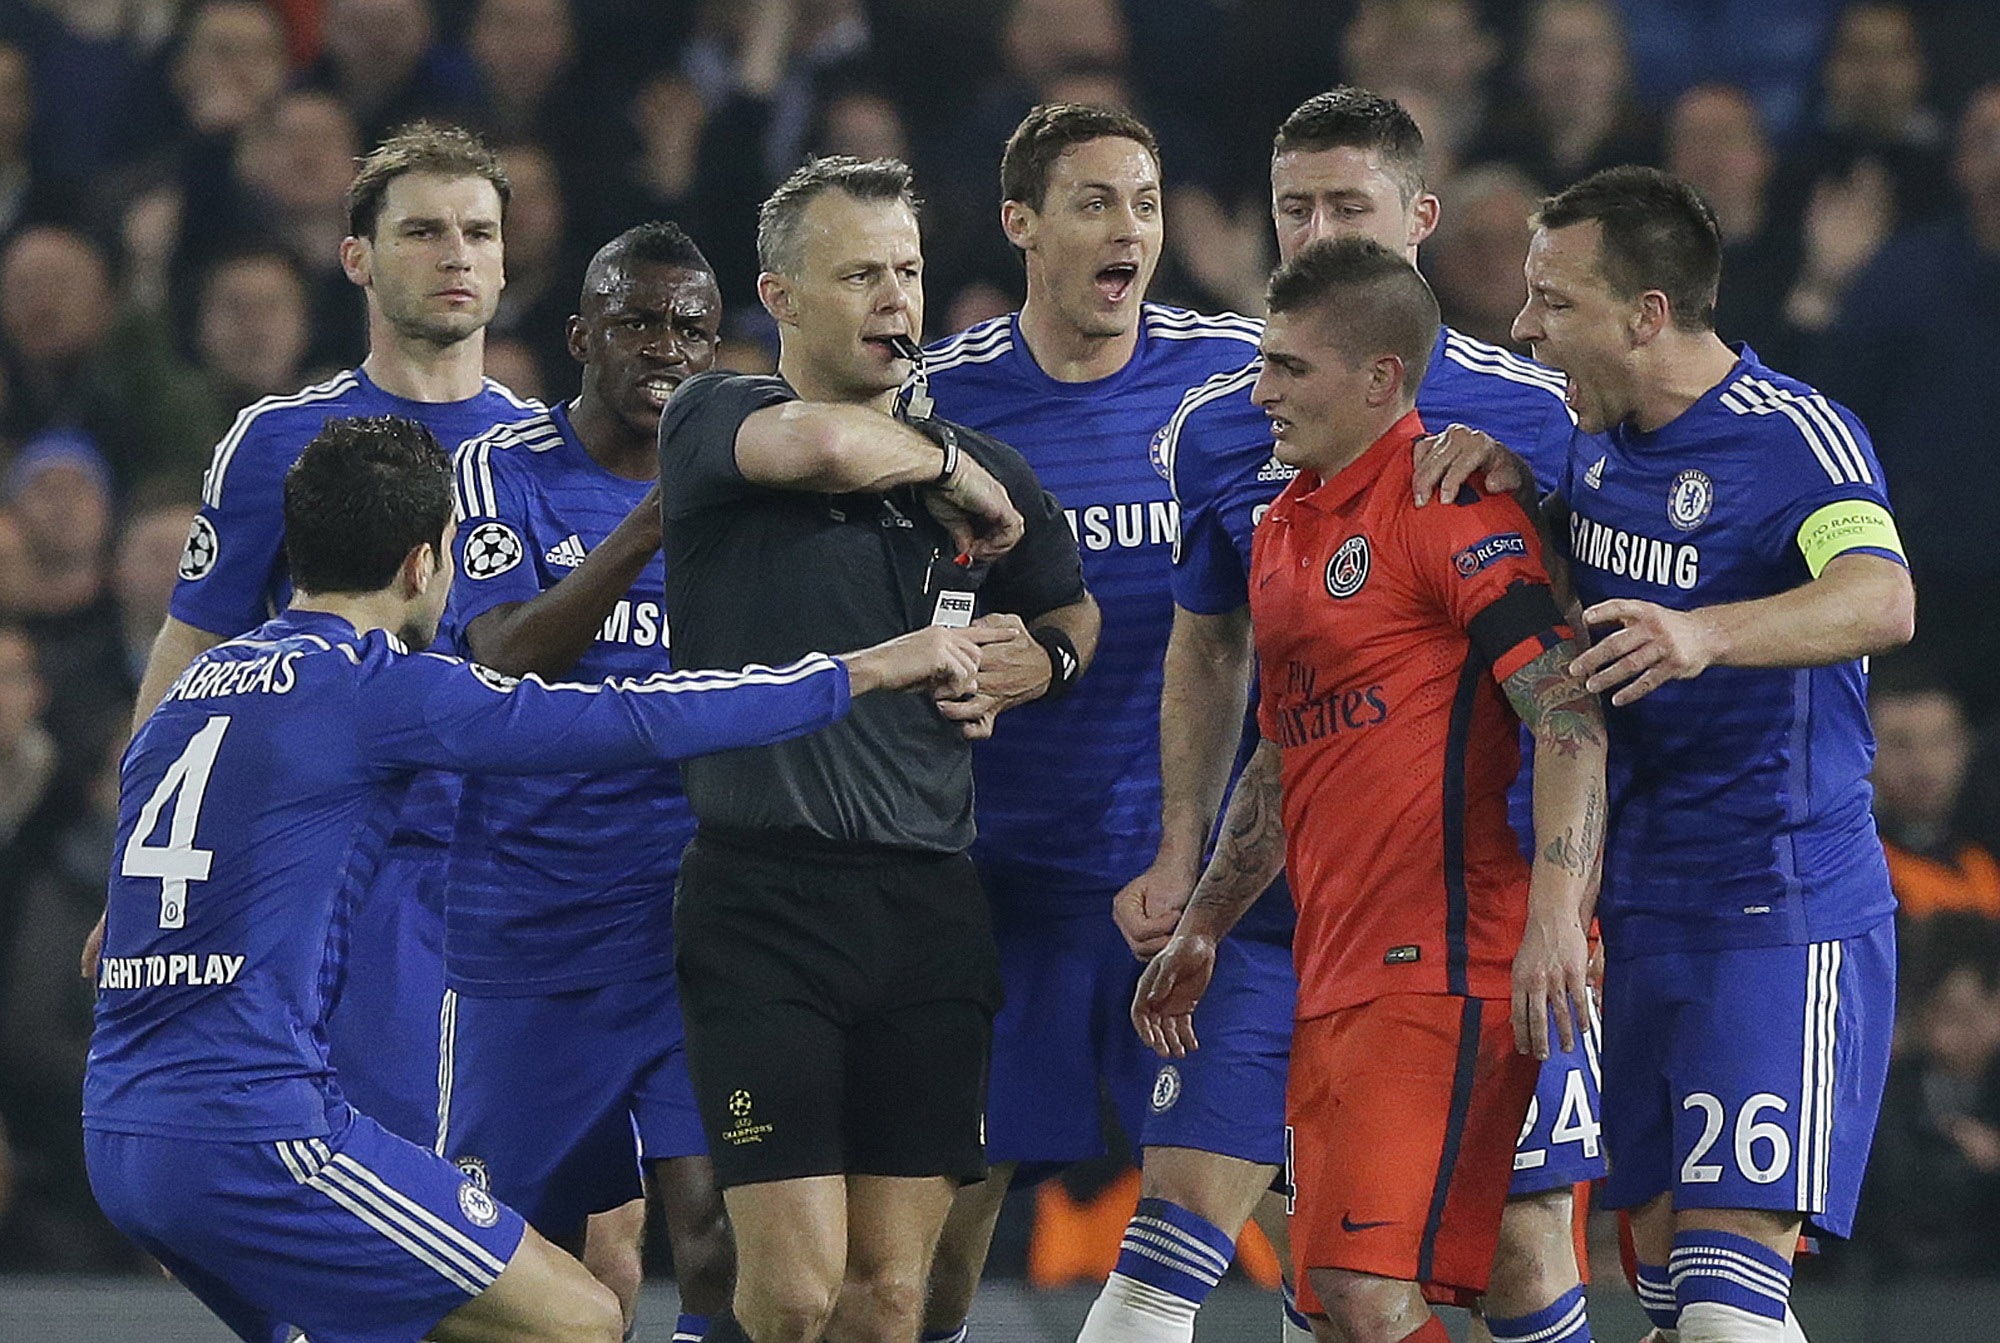 Referee Bjorn Kuipers is surrounded by Chelsea players before a red card is issued to PSG's Zlatan Ibrahimovic. Photo: AP